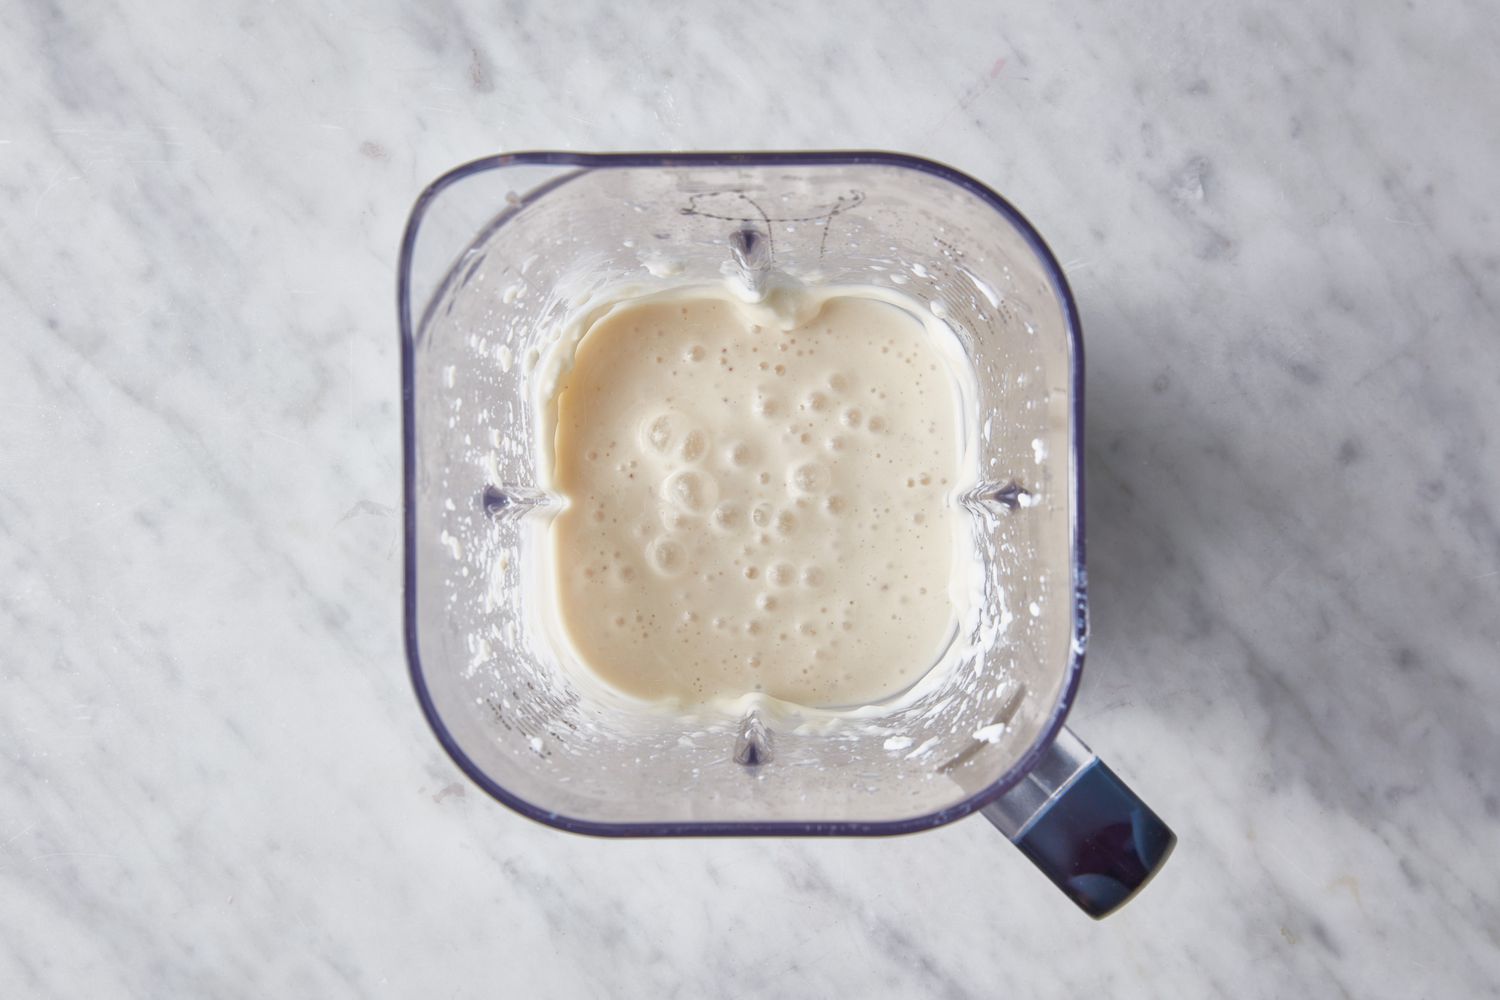 The pitcher of a blender with a pureed banana smoothie